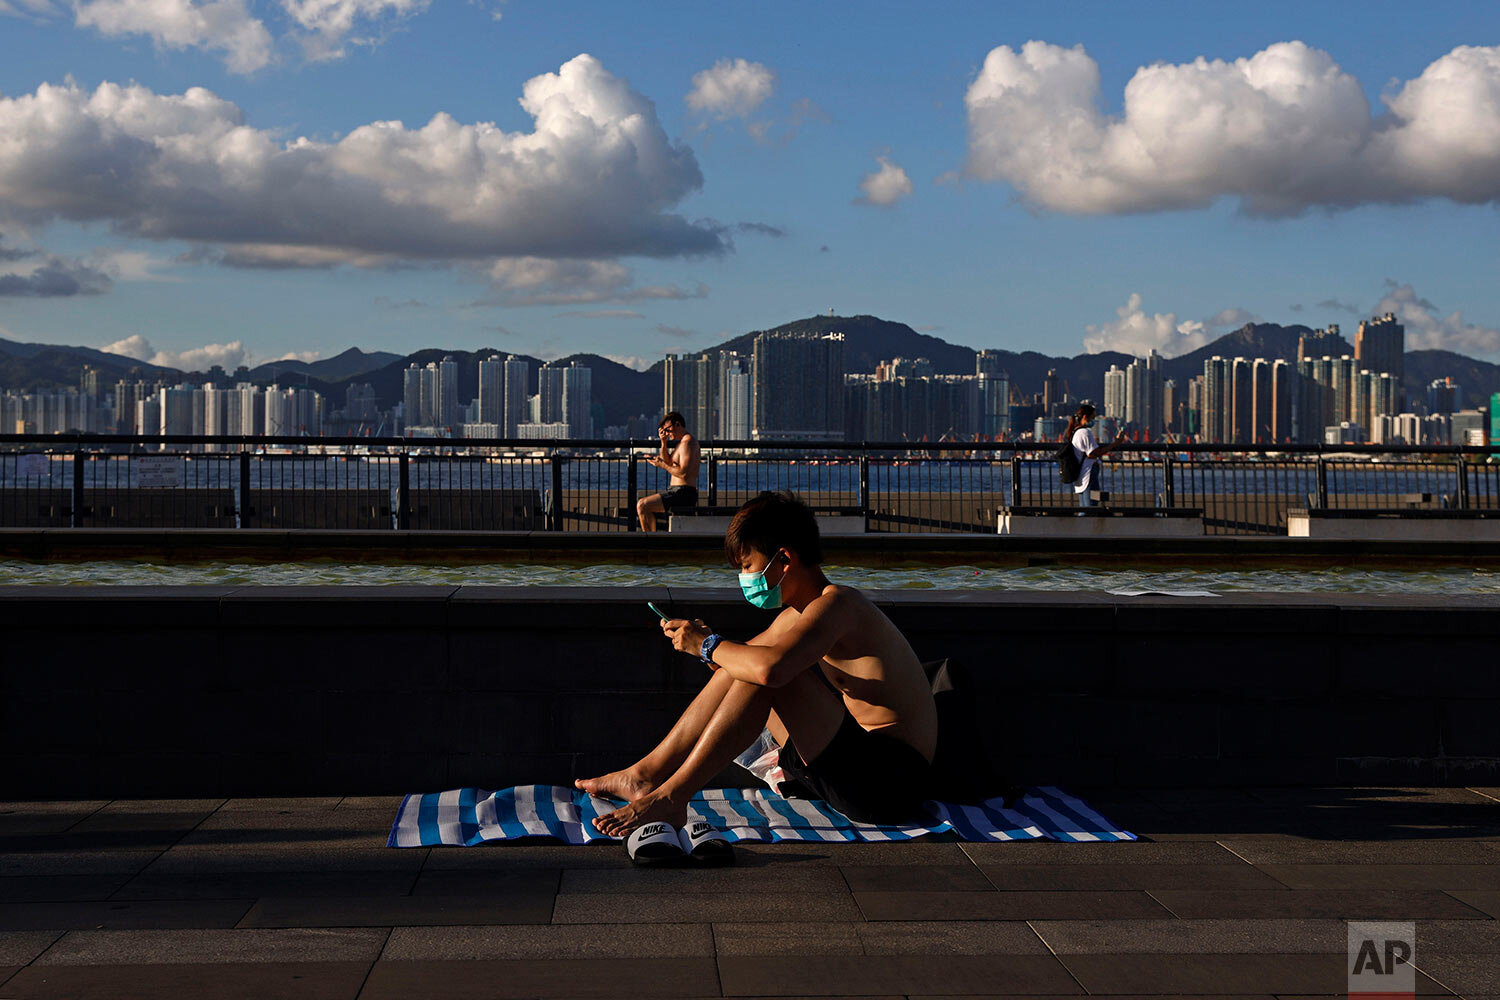  A man wearing a face mask to protect against the new coronavirus sits in the sun at a park in Hong Kong, Wednesday, July 22, 2020. (AP Photo/Kin Cheung) 